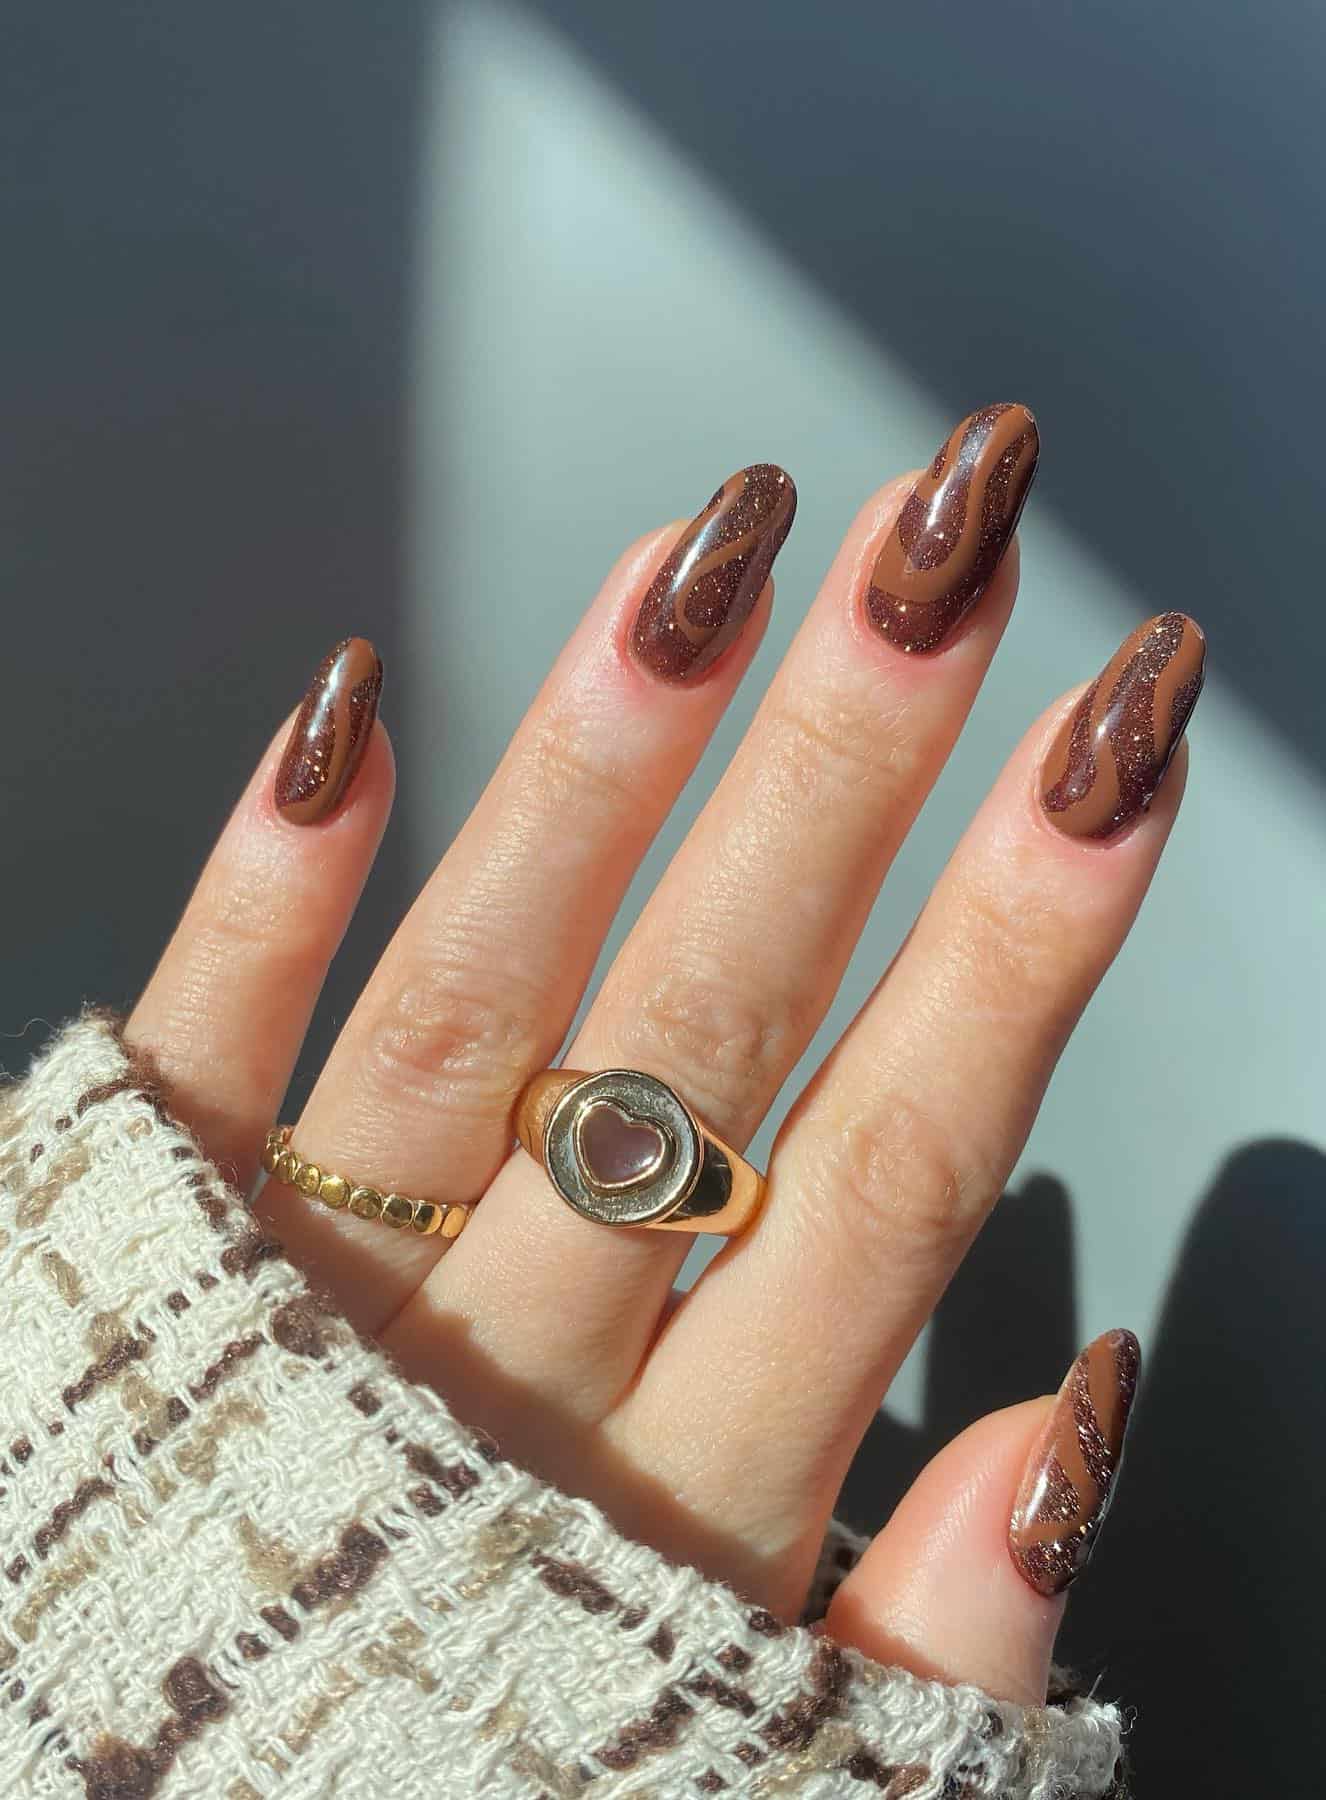 A hand with medium almond nails painted in two shades of brown polish in a swirl design with glitter details